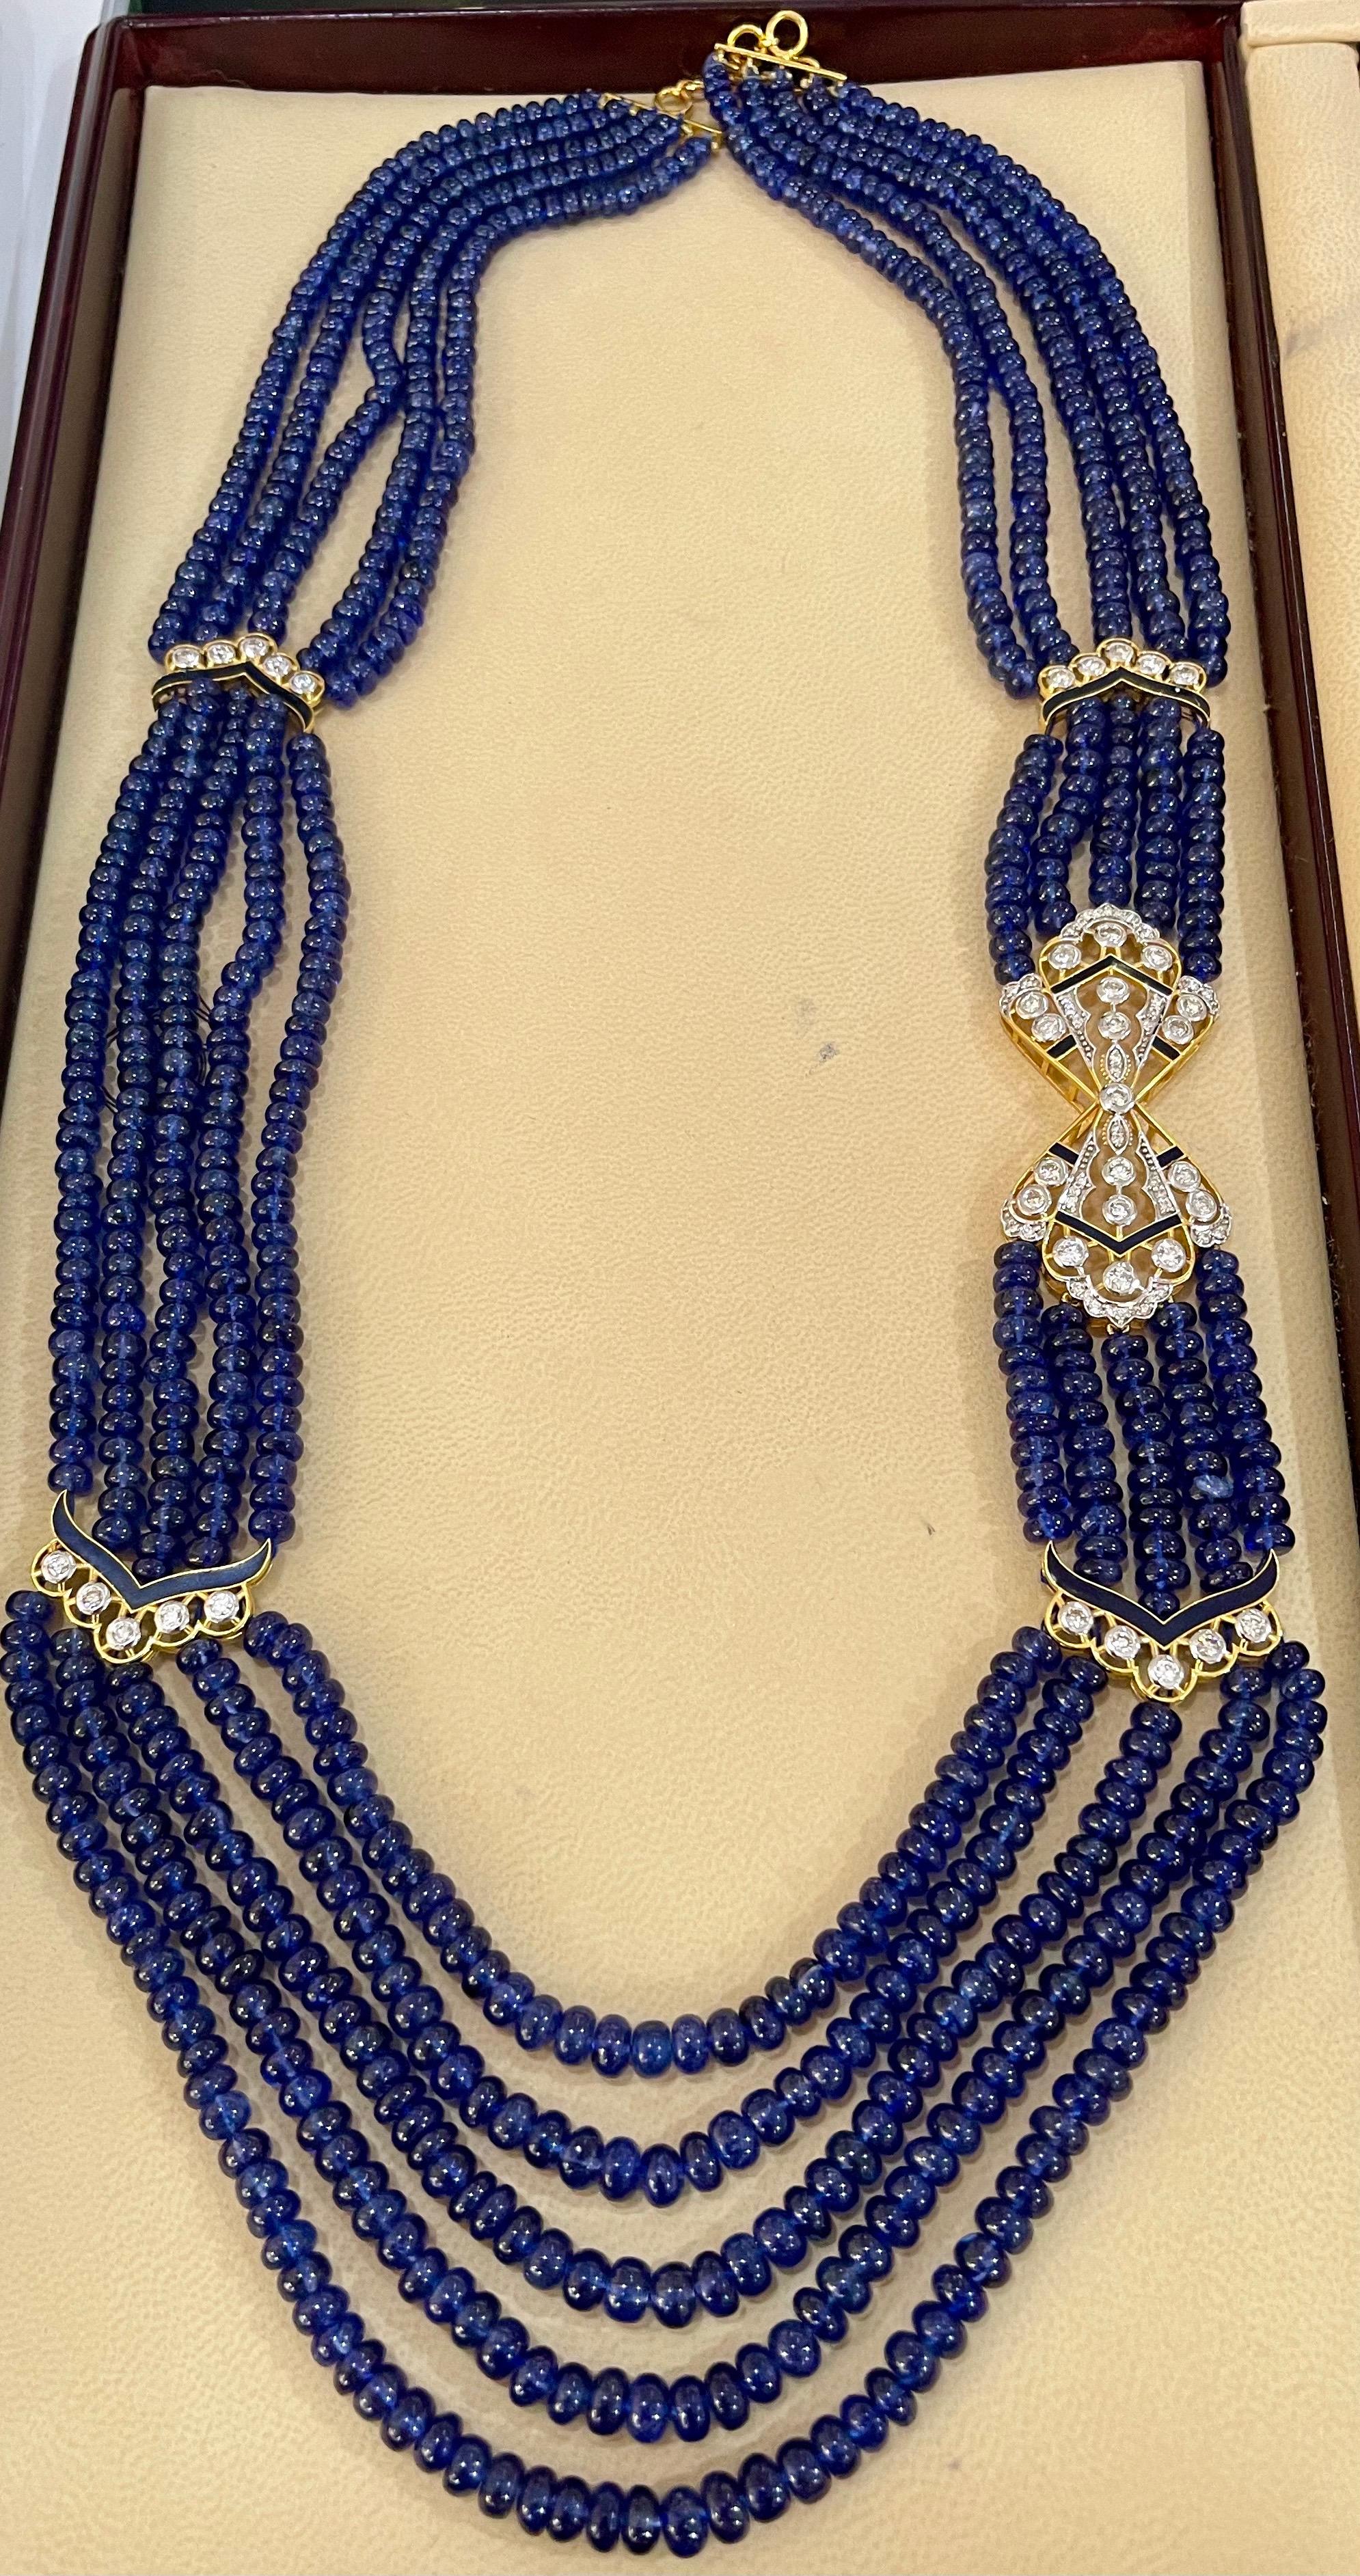 Women's 1000 Ct Natural Tanzanite Bead Five Strand Necklace + 4.5 Ct Diamond 14 K Y Gold For Sale